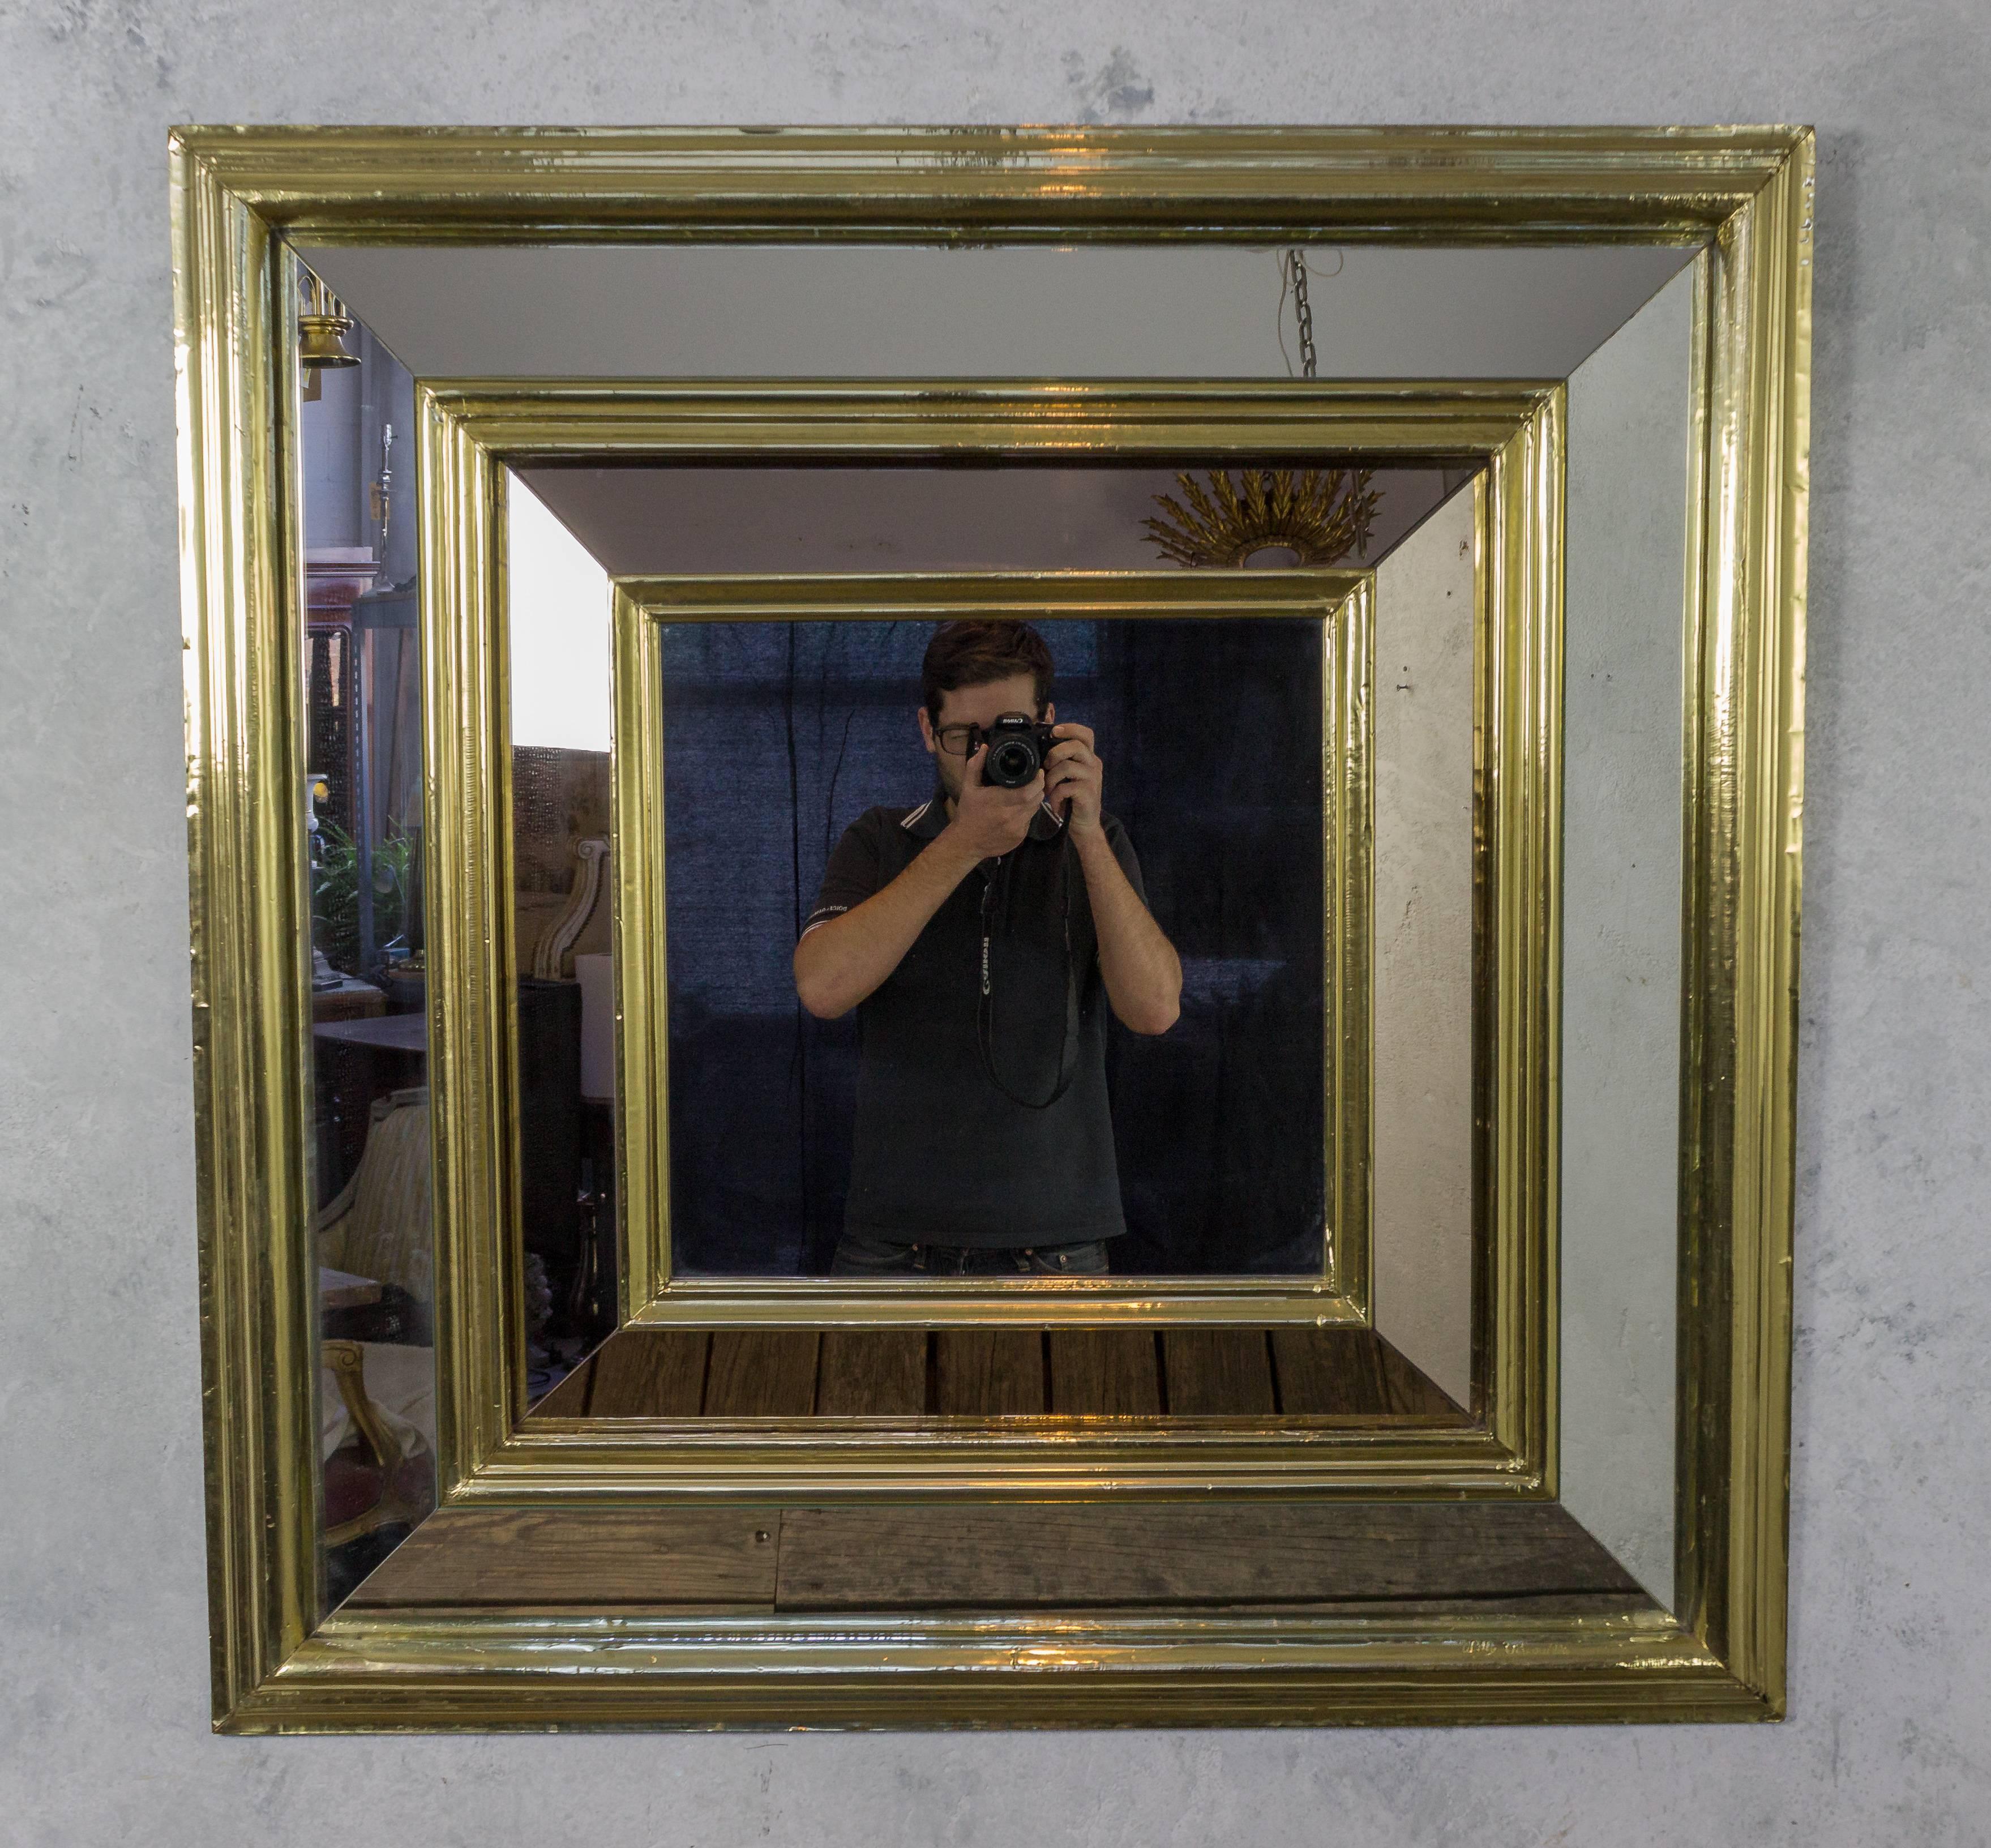 Large French 1960s square mirror with double mirrored frame with bronze and silver mirror, in a brass foil wrapped frame.

Ref #: DM0106-35

Dimensions: 43